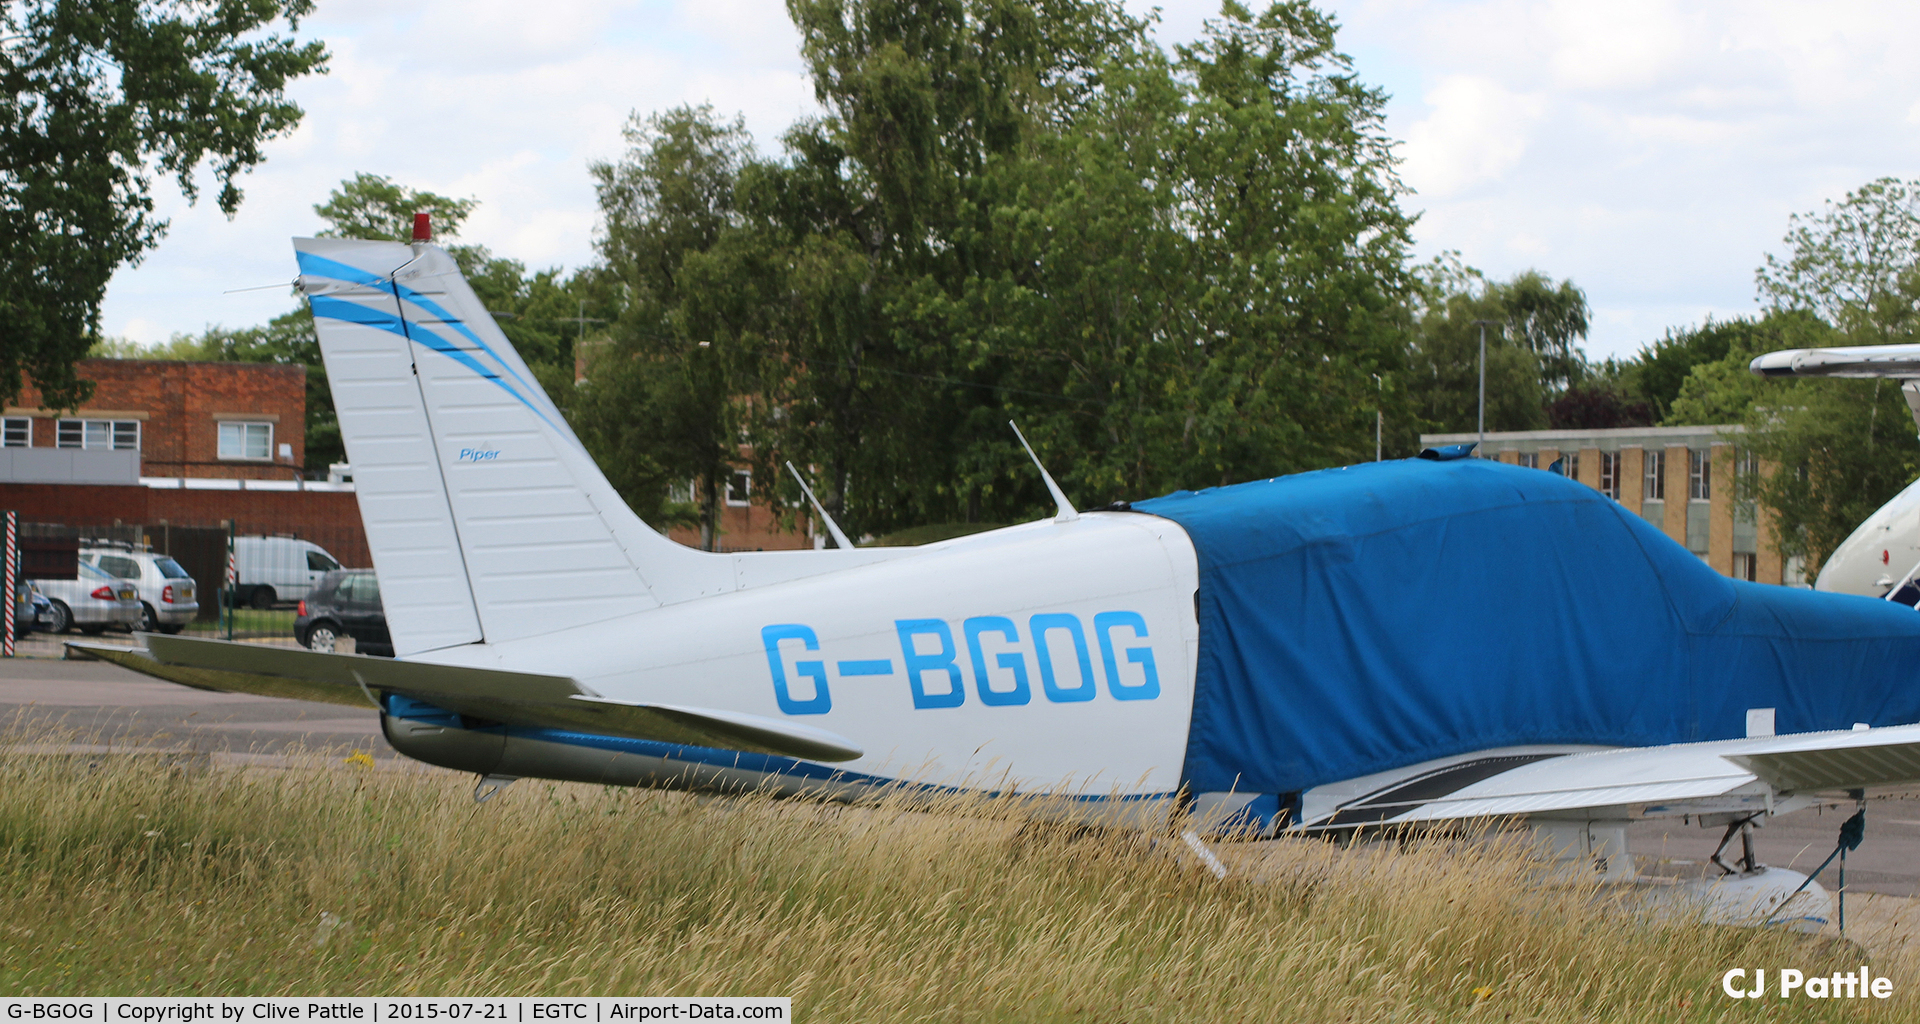 G-BGOG, 1979 Piper PA-28-161 Cherokee Warrior II C/N 28-7916350, Parked up at Cranfield, Bedfordshire. UK EGTC